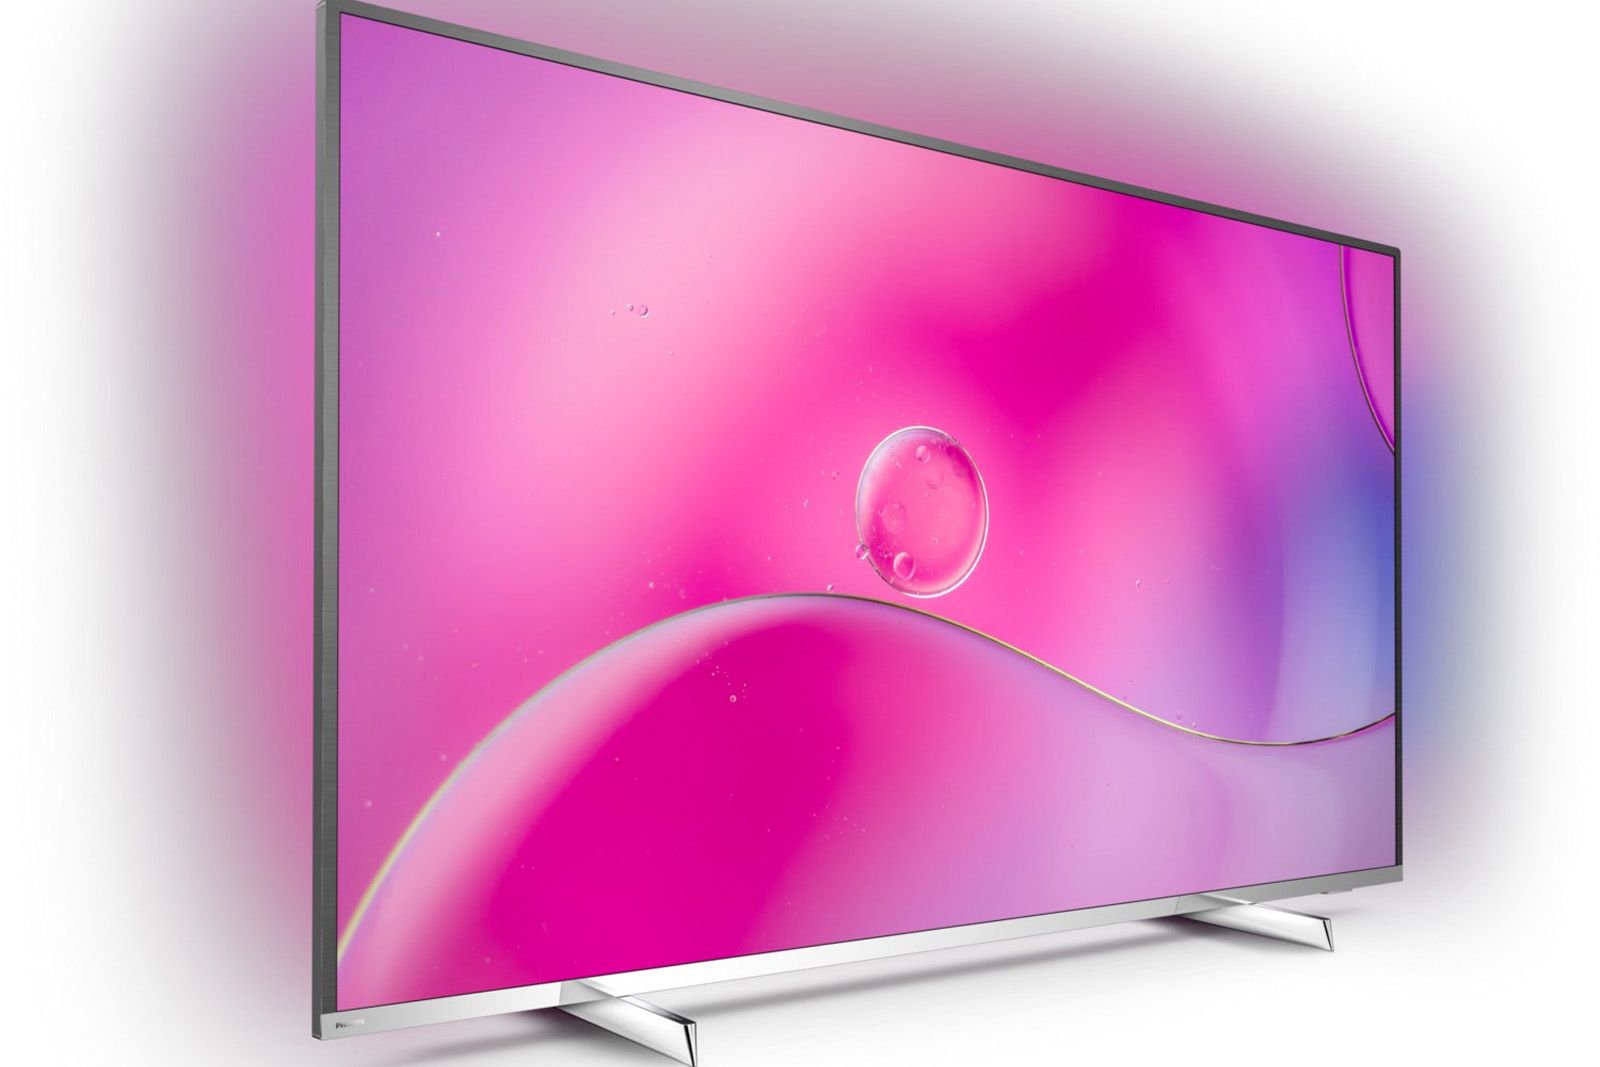 Philips Georg Jensen TV is now available at John Lewis image 1